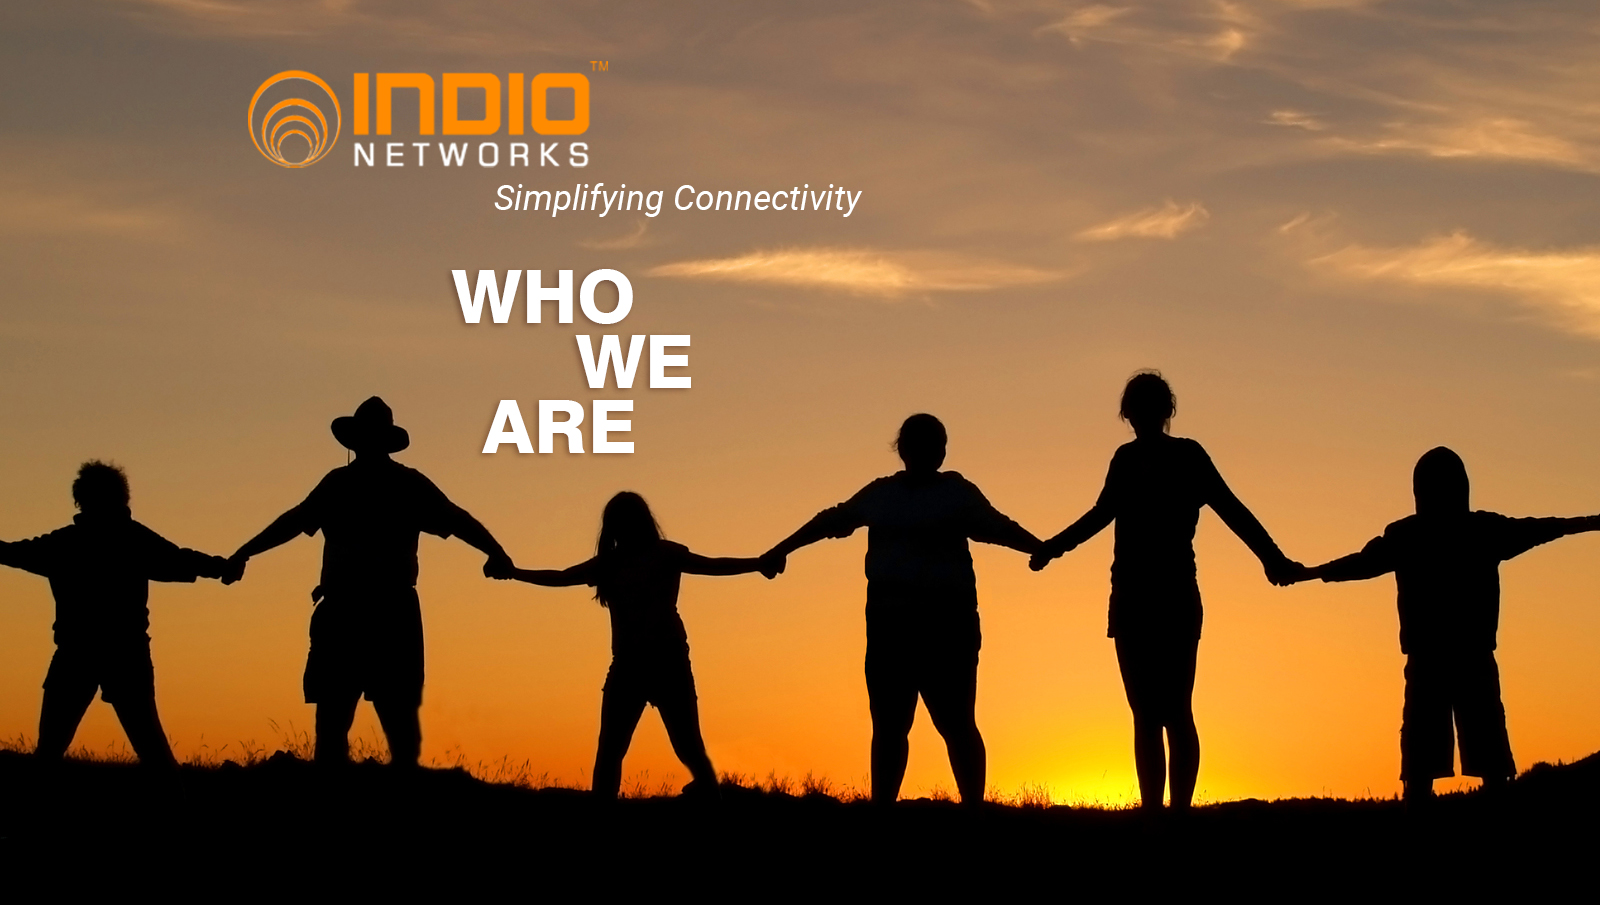 Next generation networking solutions - Indio Networks